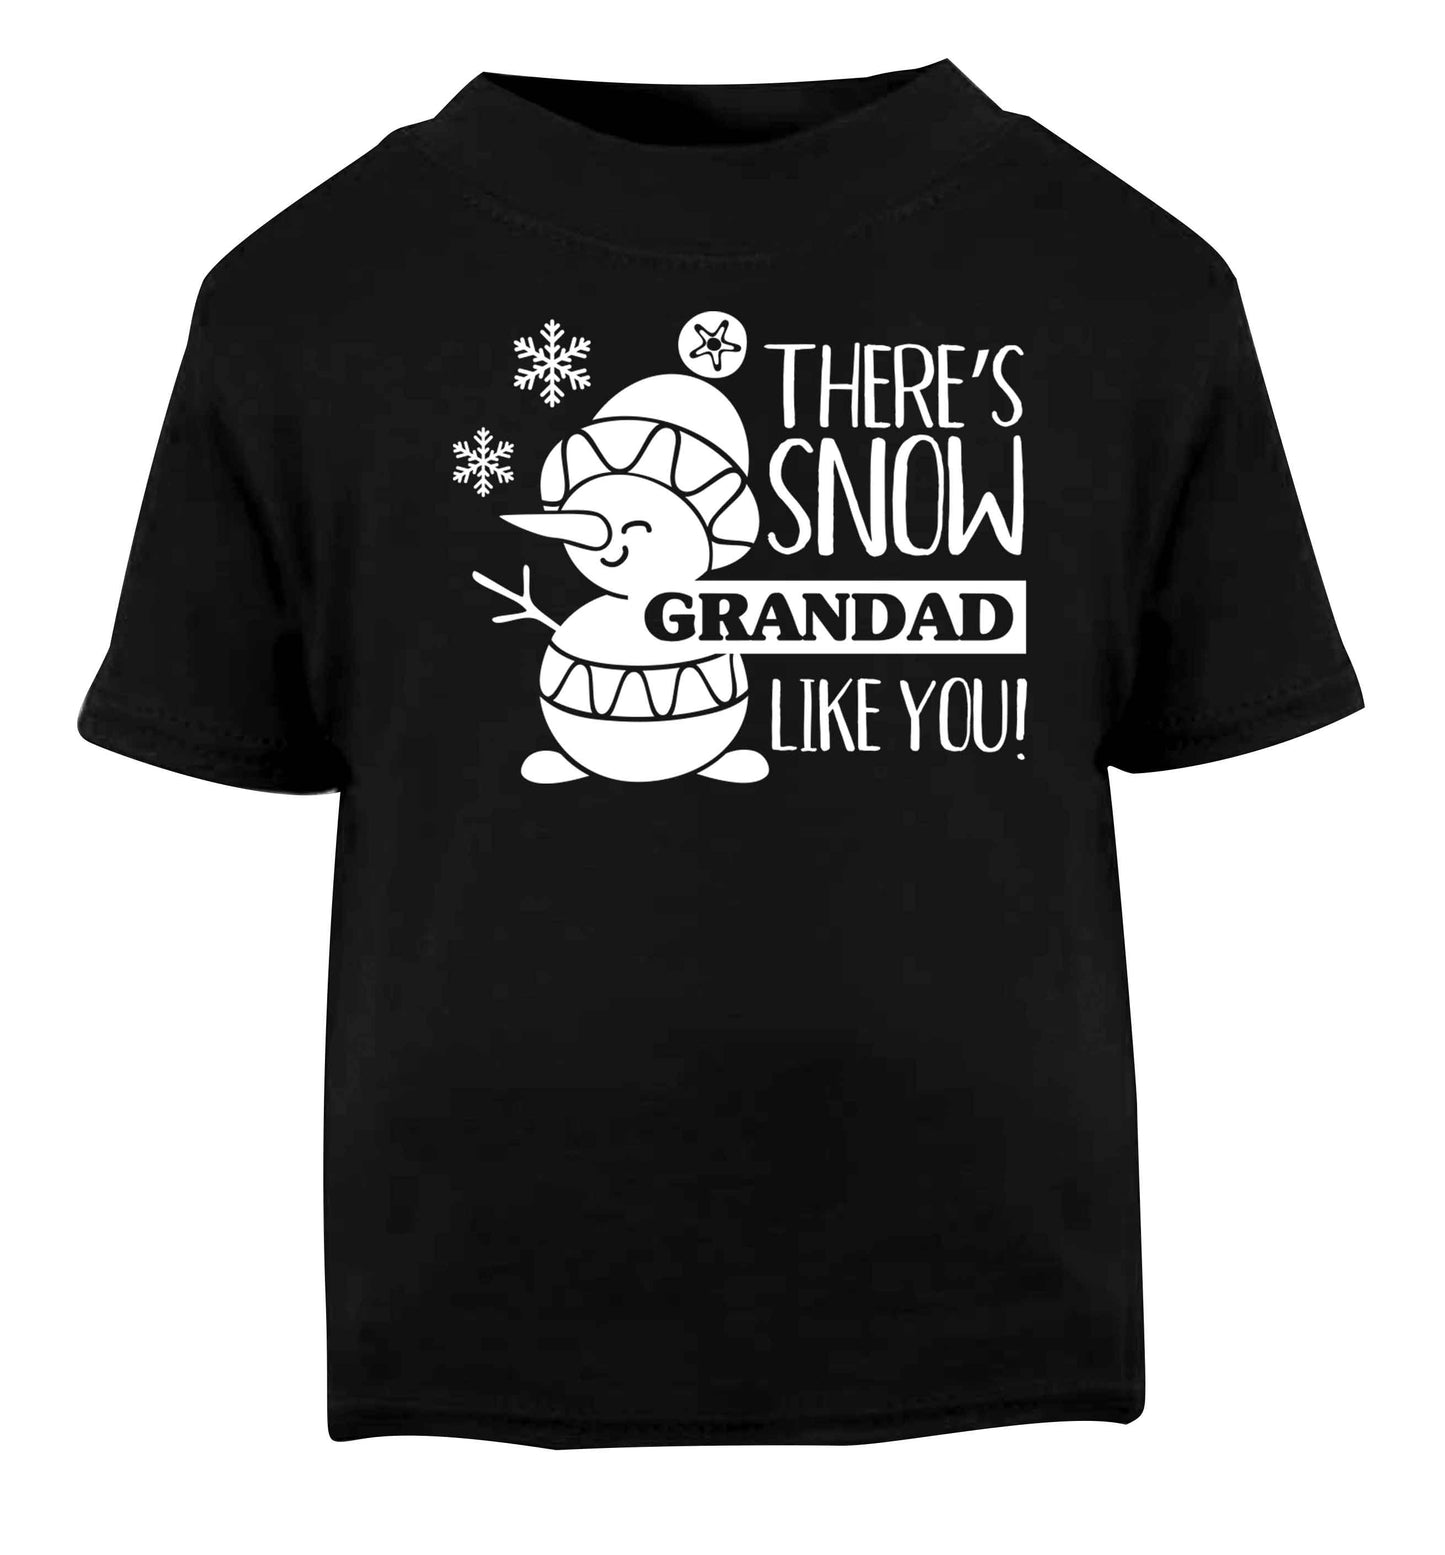 There's snow grandad like you Black baby toddler Tshirt 2 years